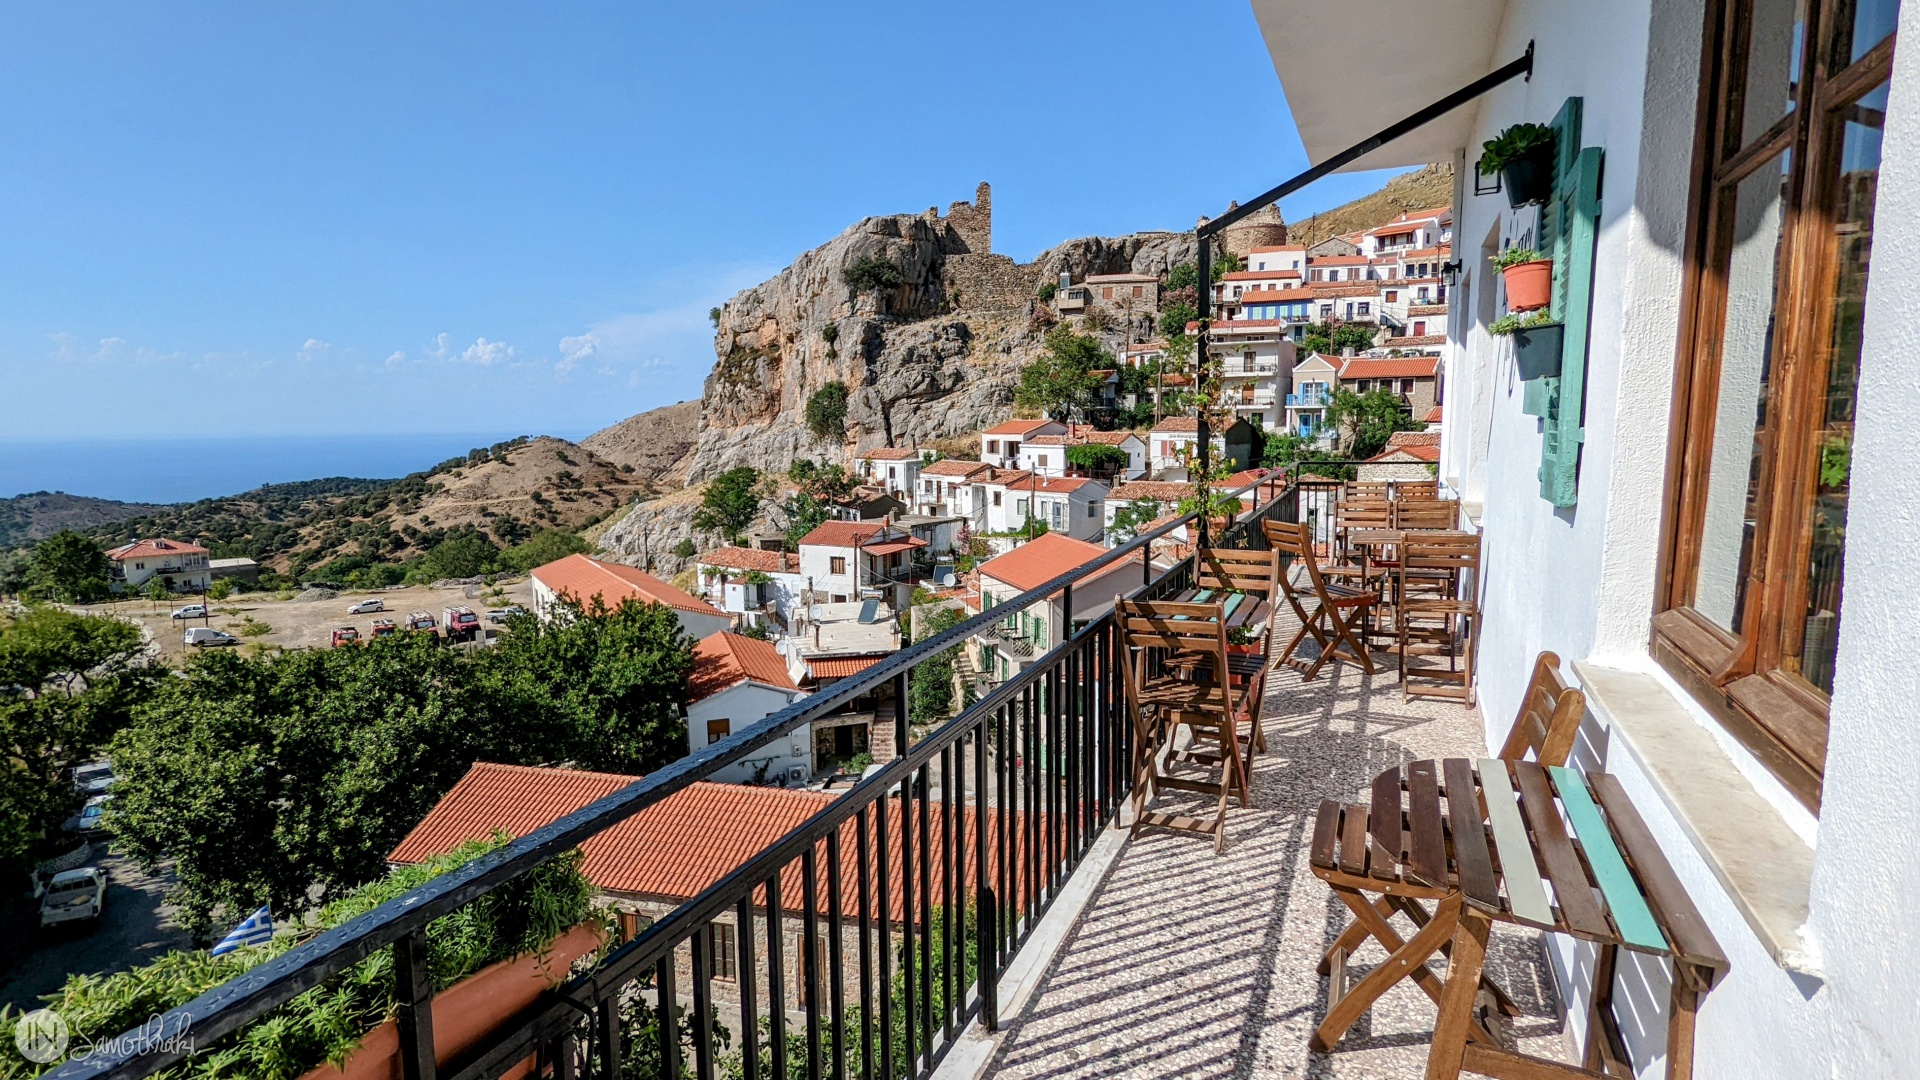 Trapeza, the coffee shop with a view